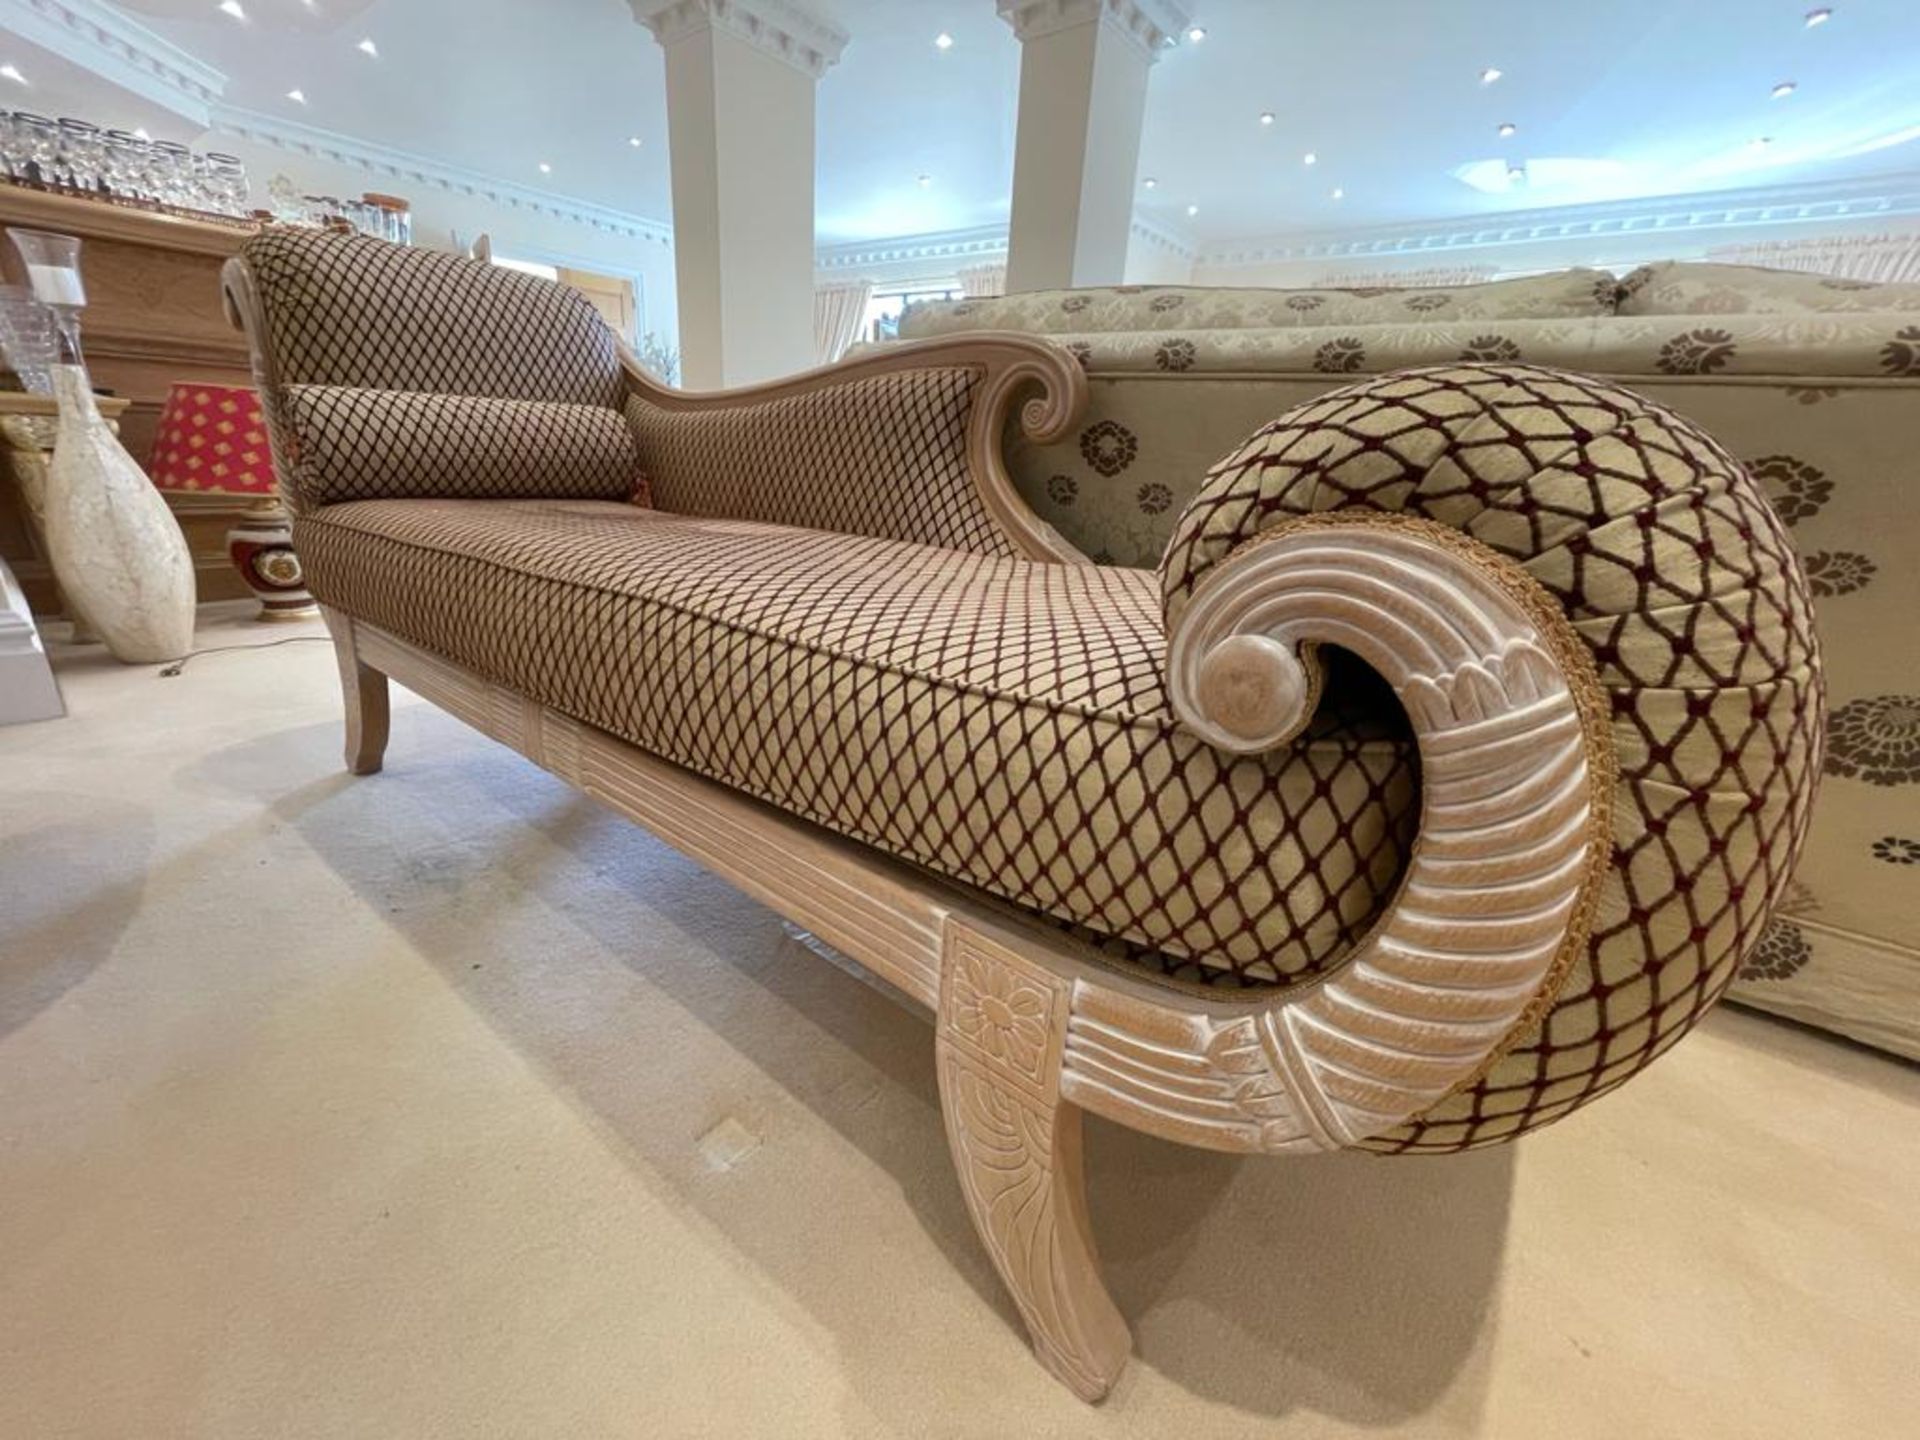 1 x Elegant Chaise Longue Sofa With Carved Wooden Frame, Scroll End and Diamond  Pattern Fabric - NO - Image 13 of 16